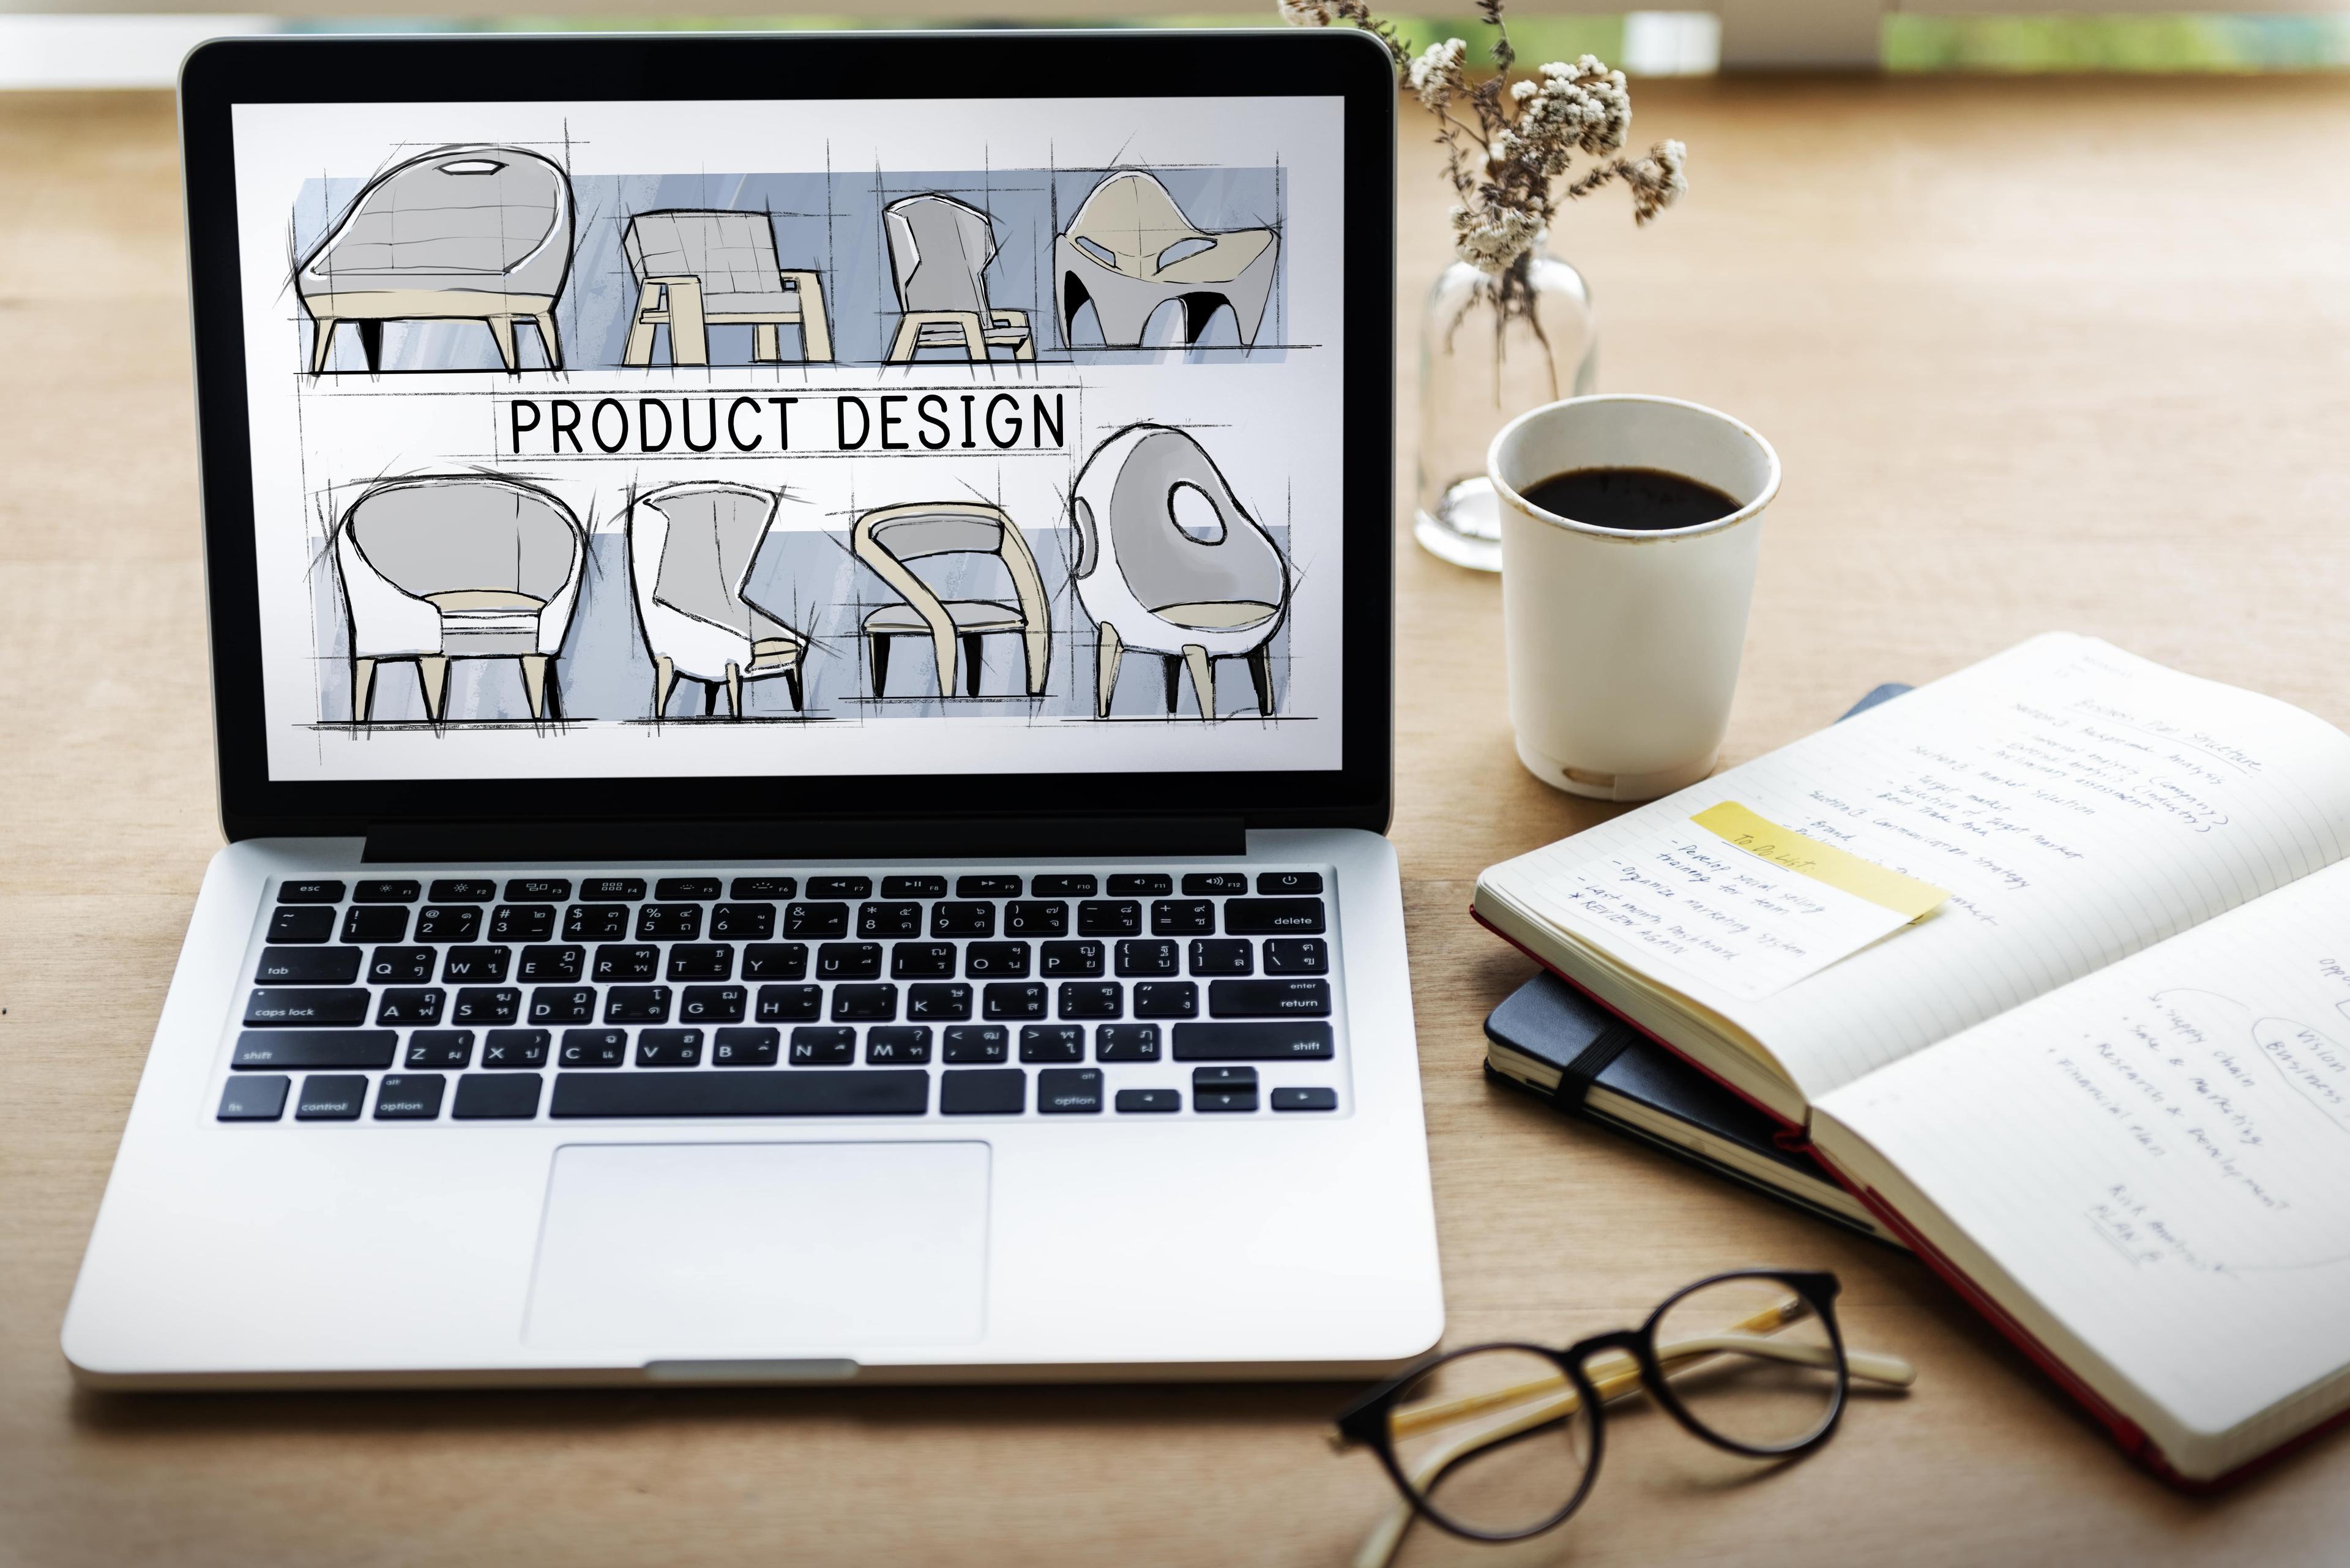 Product design on the screen of a laptop, glasses, and a cup of coffee on a table